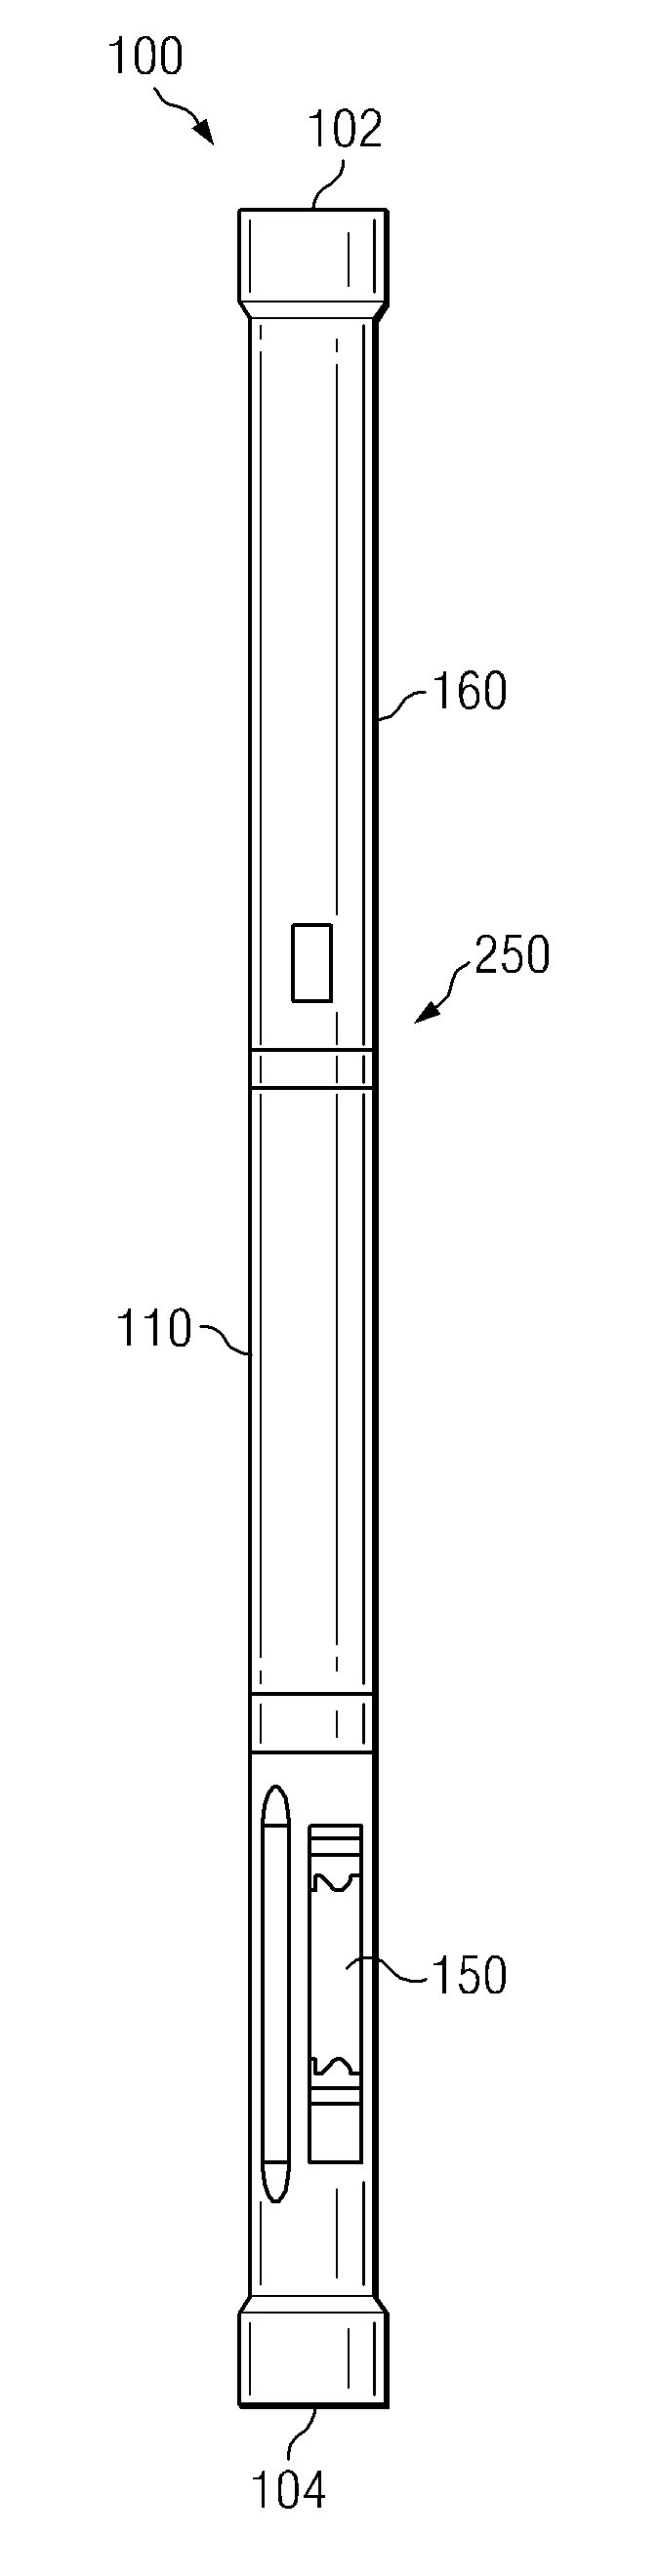 Rotary Steerable Tool Employing a Timed Connection